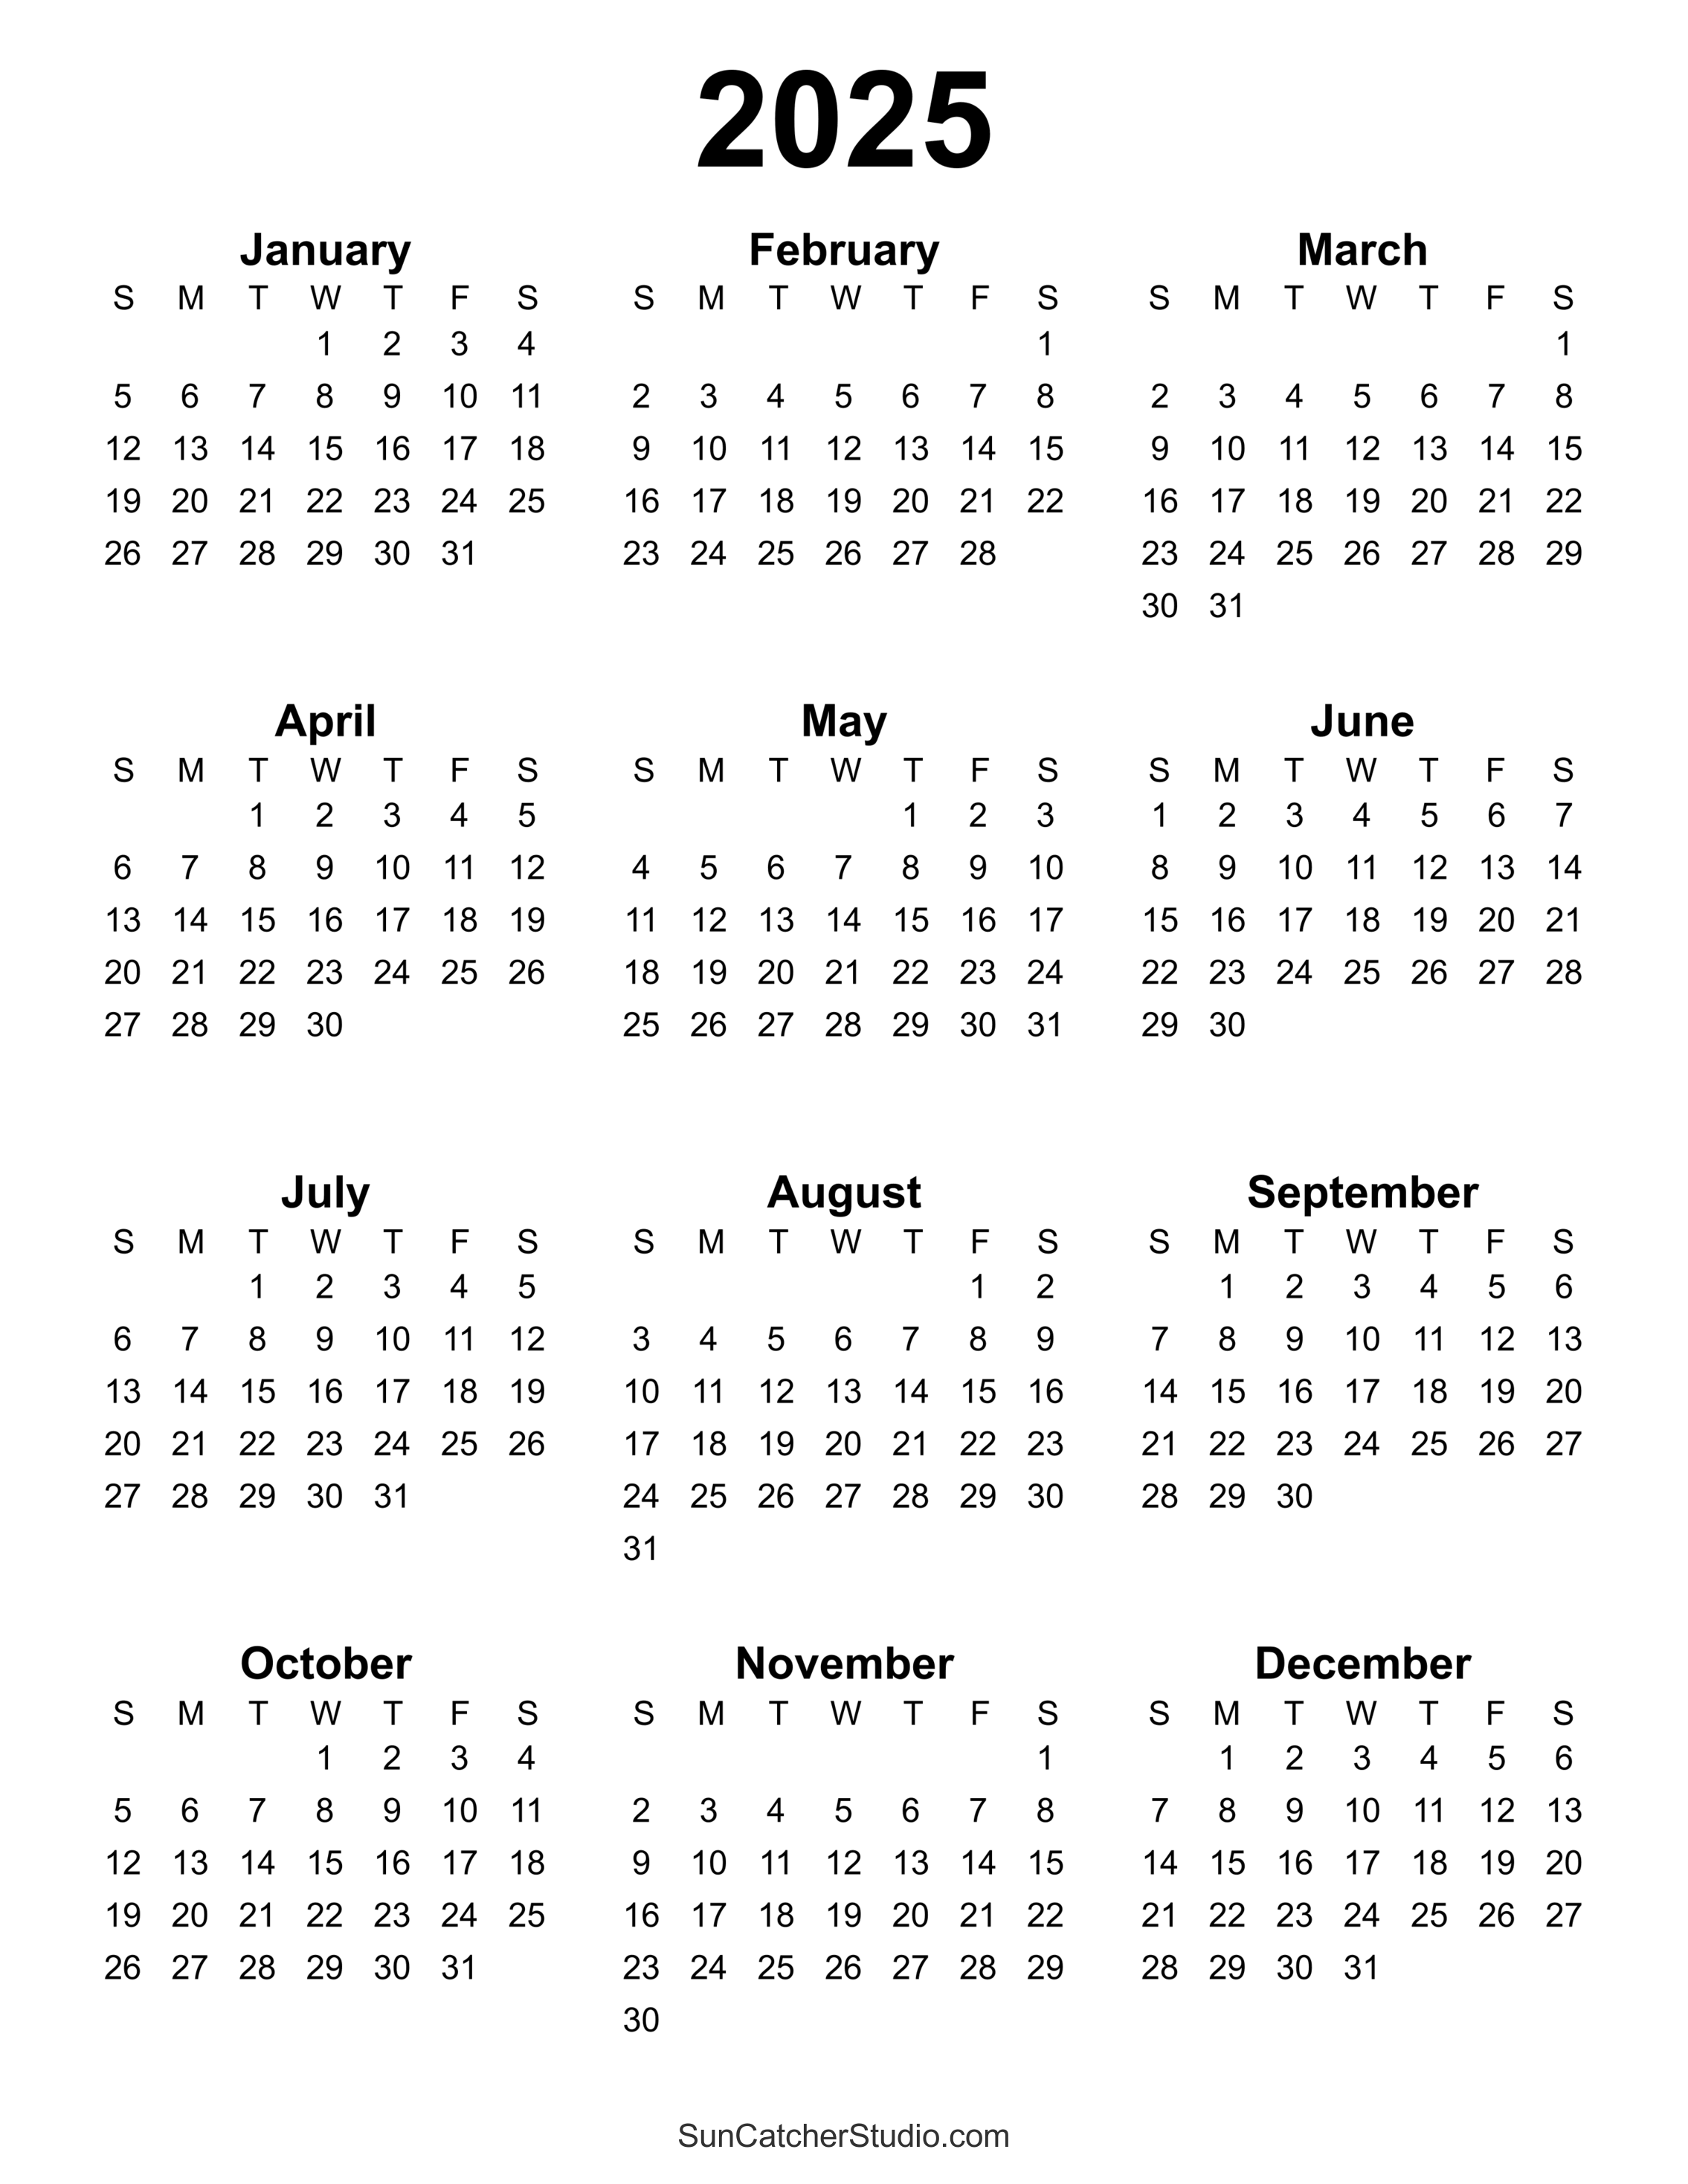 free-printable-2025-yearly-calendar-diy-projects-patterns-monograms